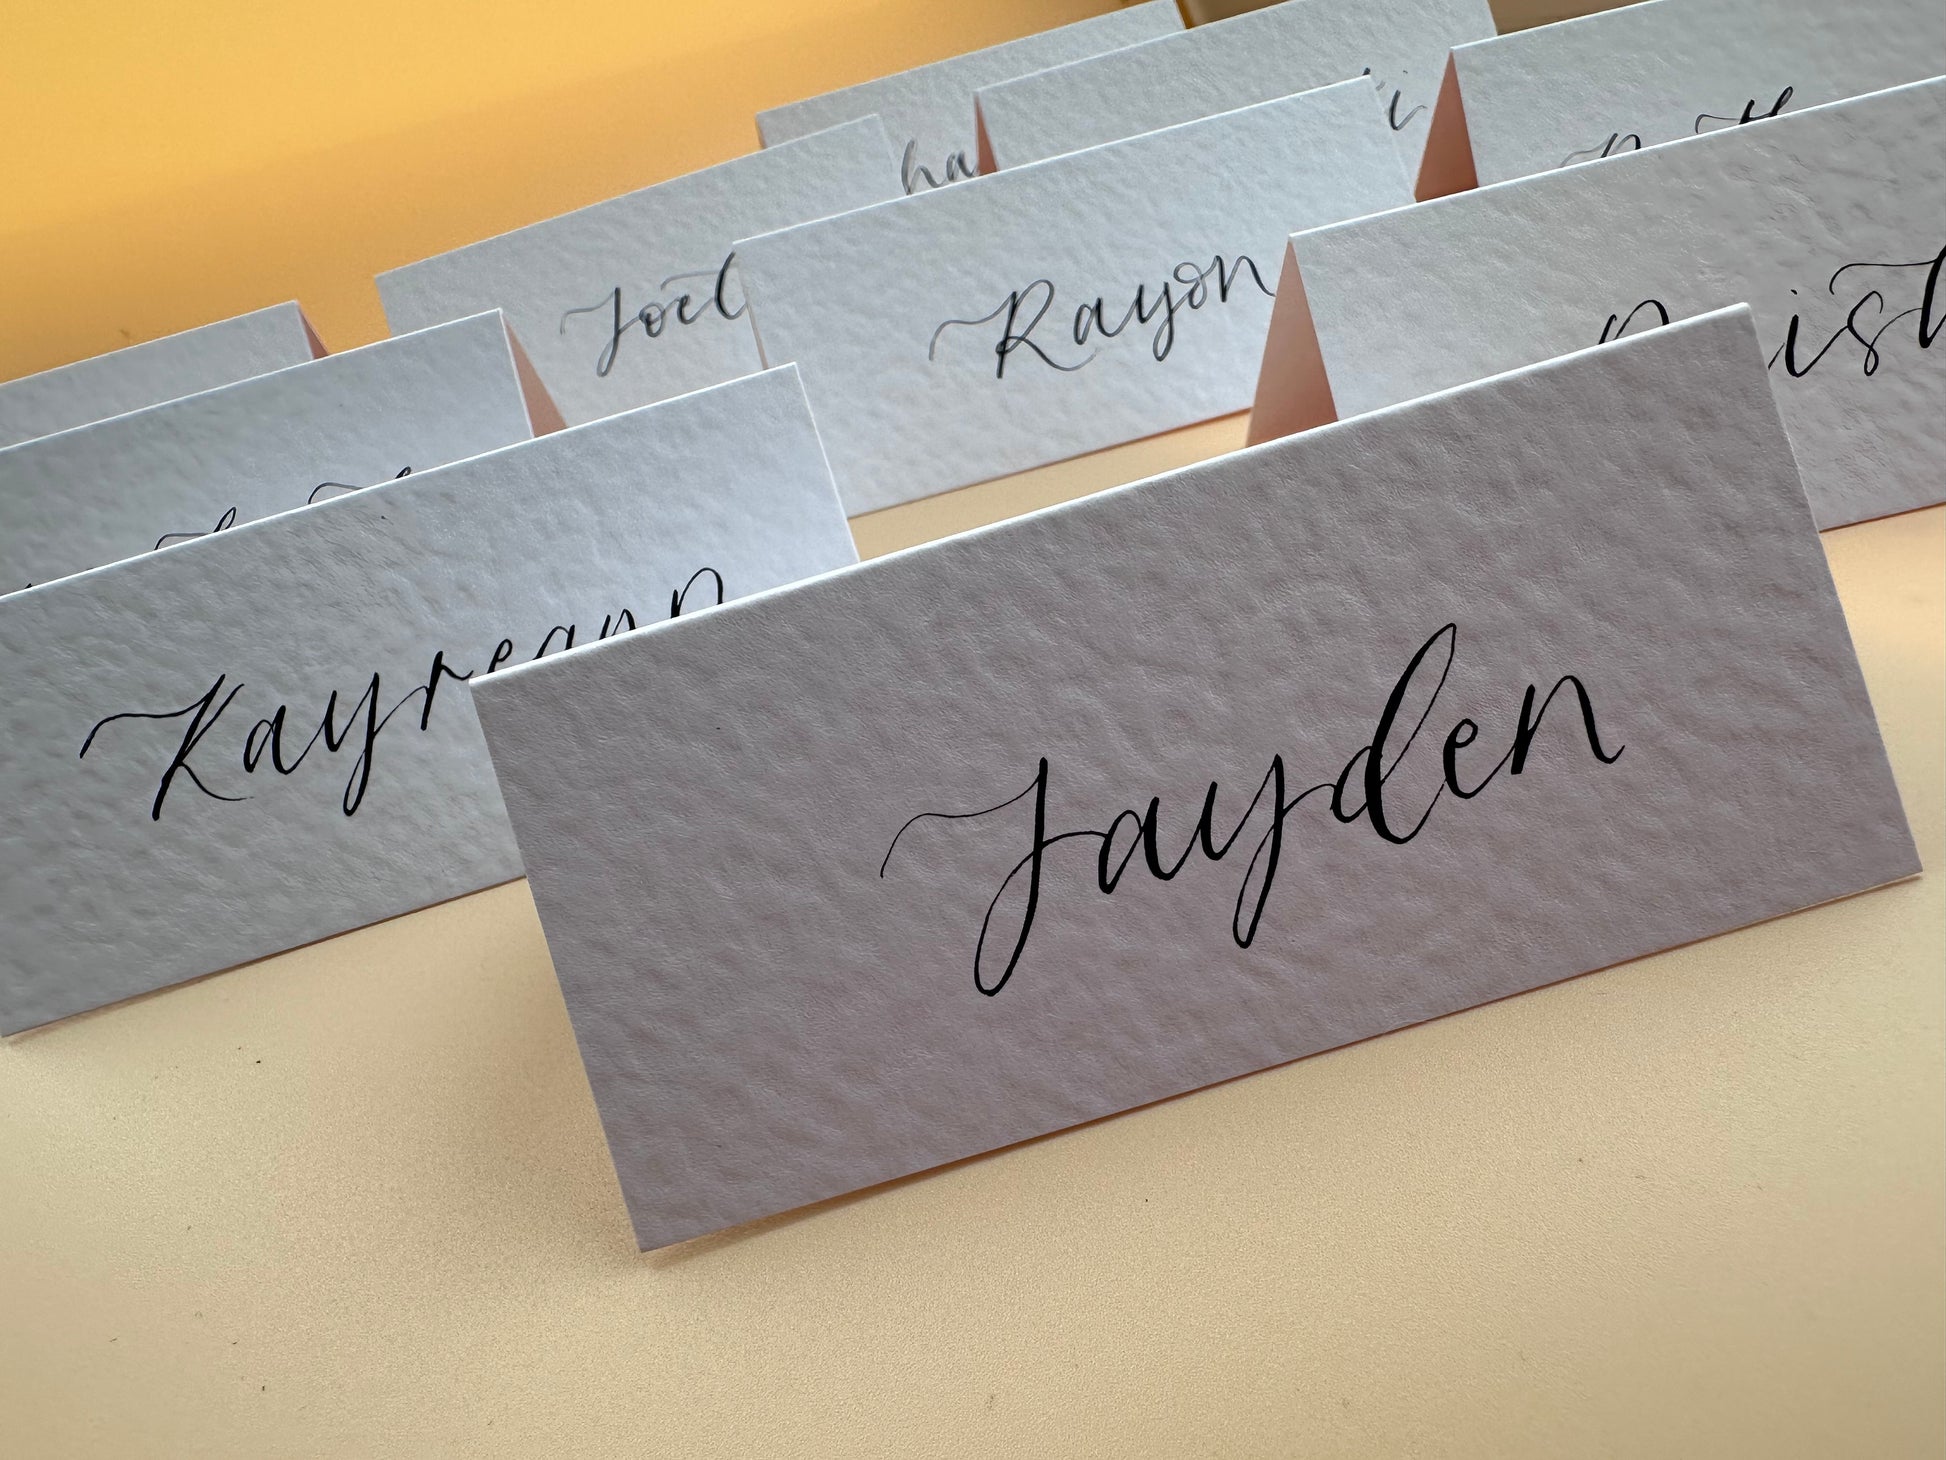 hammered paper, wedding place card, rustic wedding stationery, elegant table decor, handmade place cards, custom calligraphy, unique wedding details, vintage wedding theme, personalized place settings, textured paper cards, custom card stock, artisan wedding stationery, affordable wedding place cards, DIY wedding projects, modern calligraphy for events